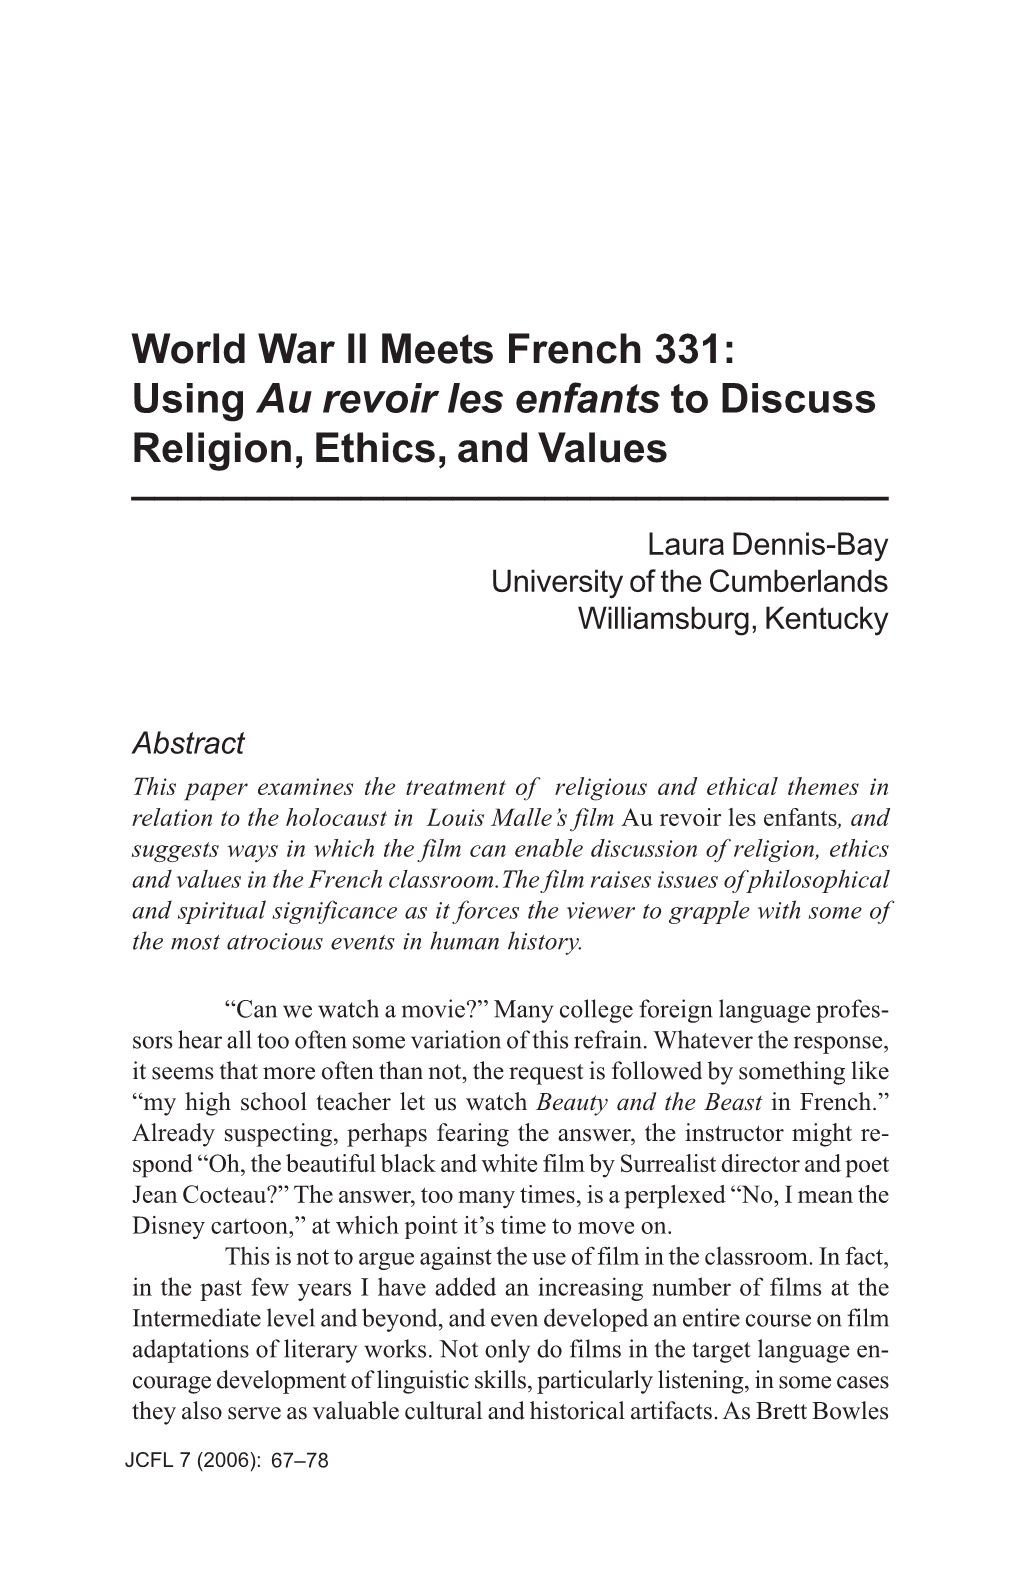 World War II Meets French 331: Using Au Revoir Les Enfants to Discuss Religion, Ethics, And